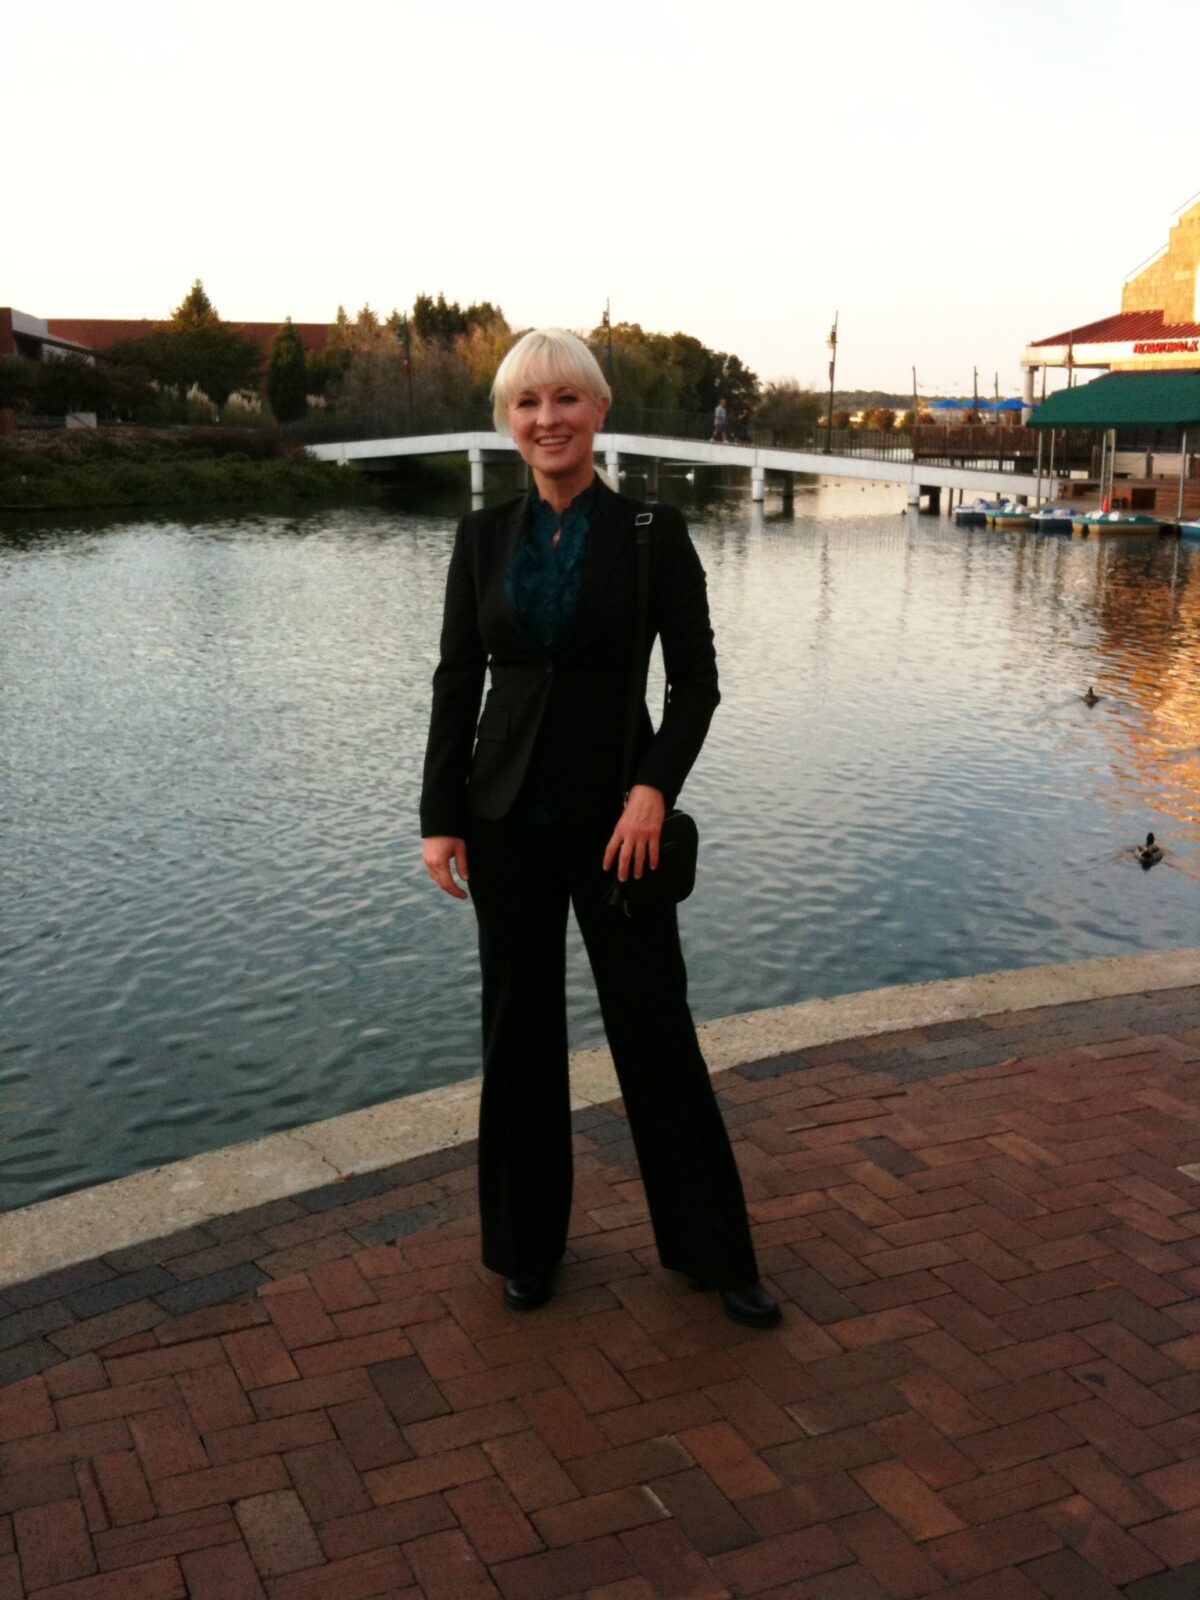 Hunter Storm by a tranquil lake at sunset, epitomizing tech consulting and speaking engagements in a chic, black Theory suit with teal silk designer blouse and Prada boots.